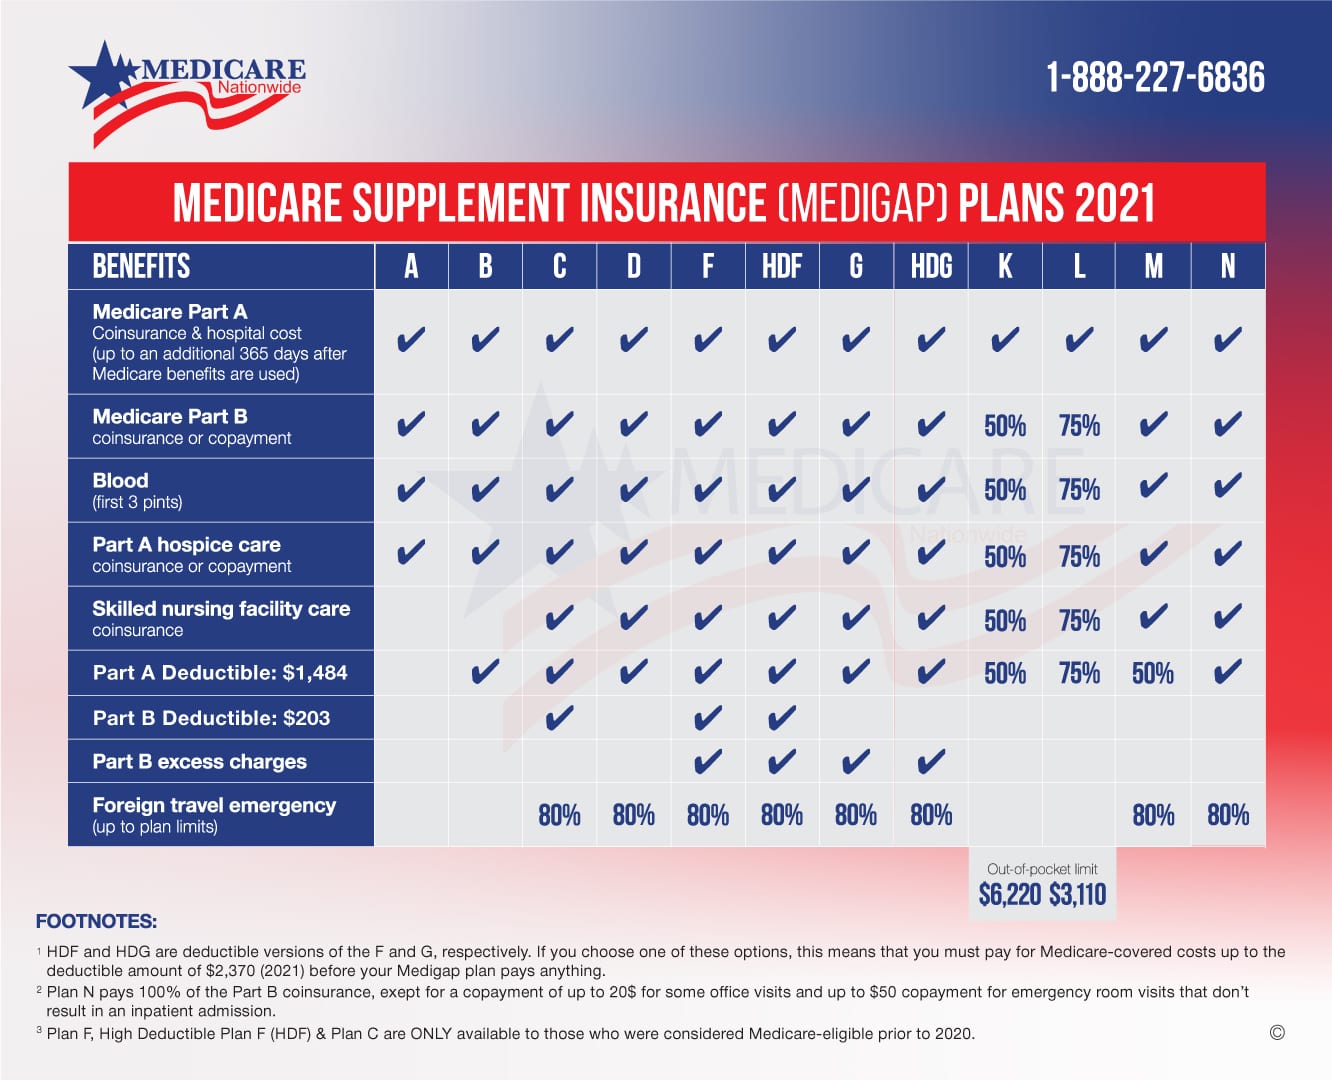 How to choose a Medicare Supplement